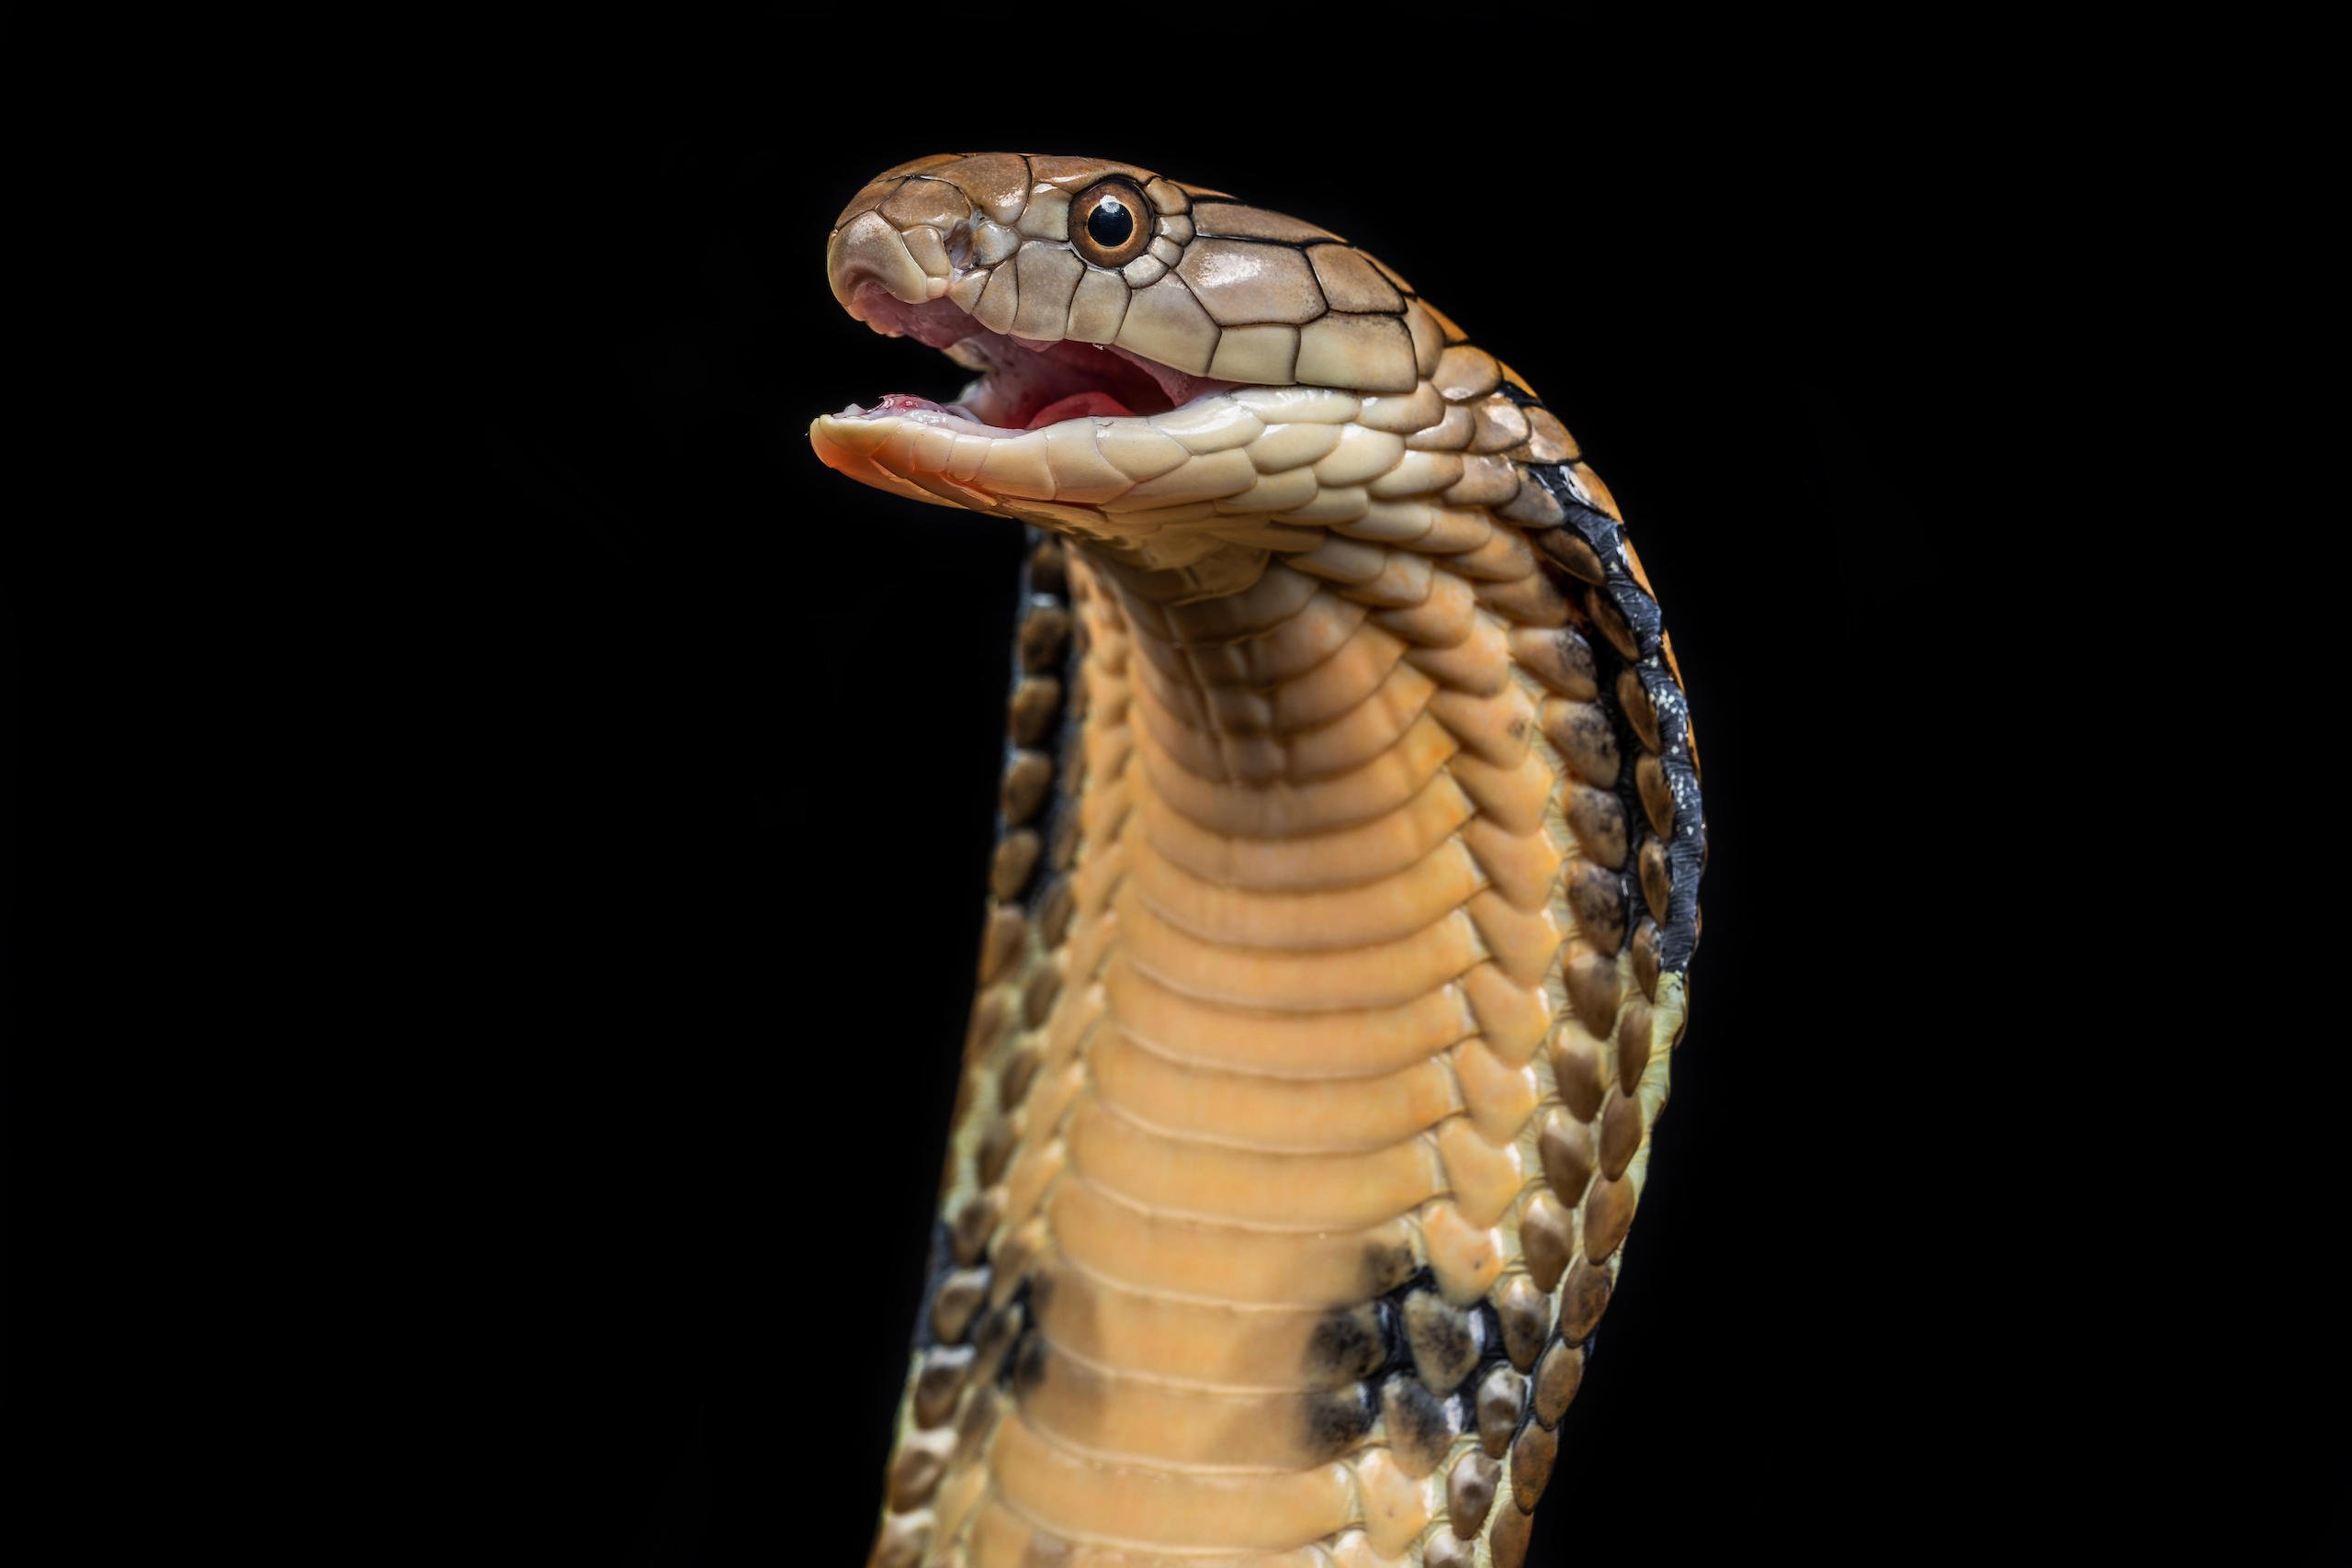 <p>In India, king cobras are often killed when they are encountered out of fear they will attack (Image: Alamy)</p>